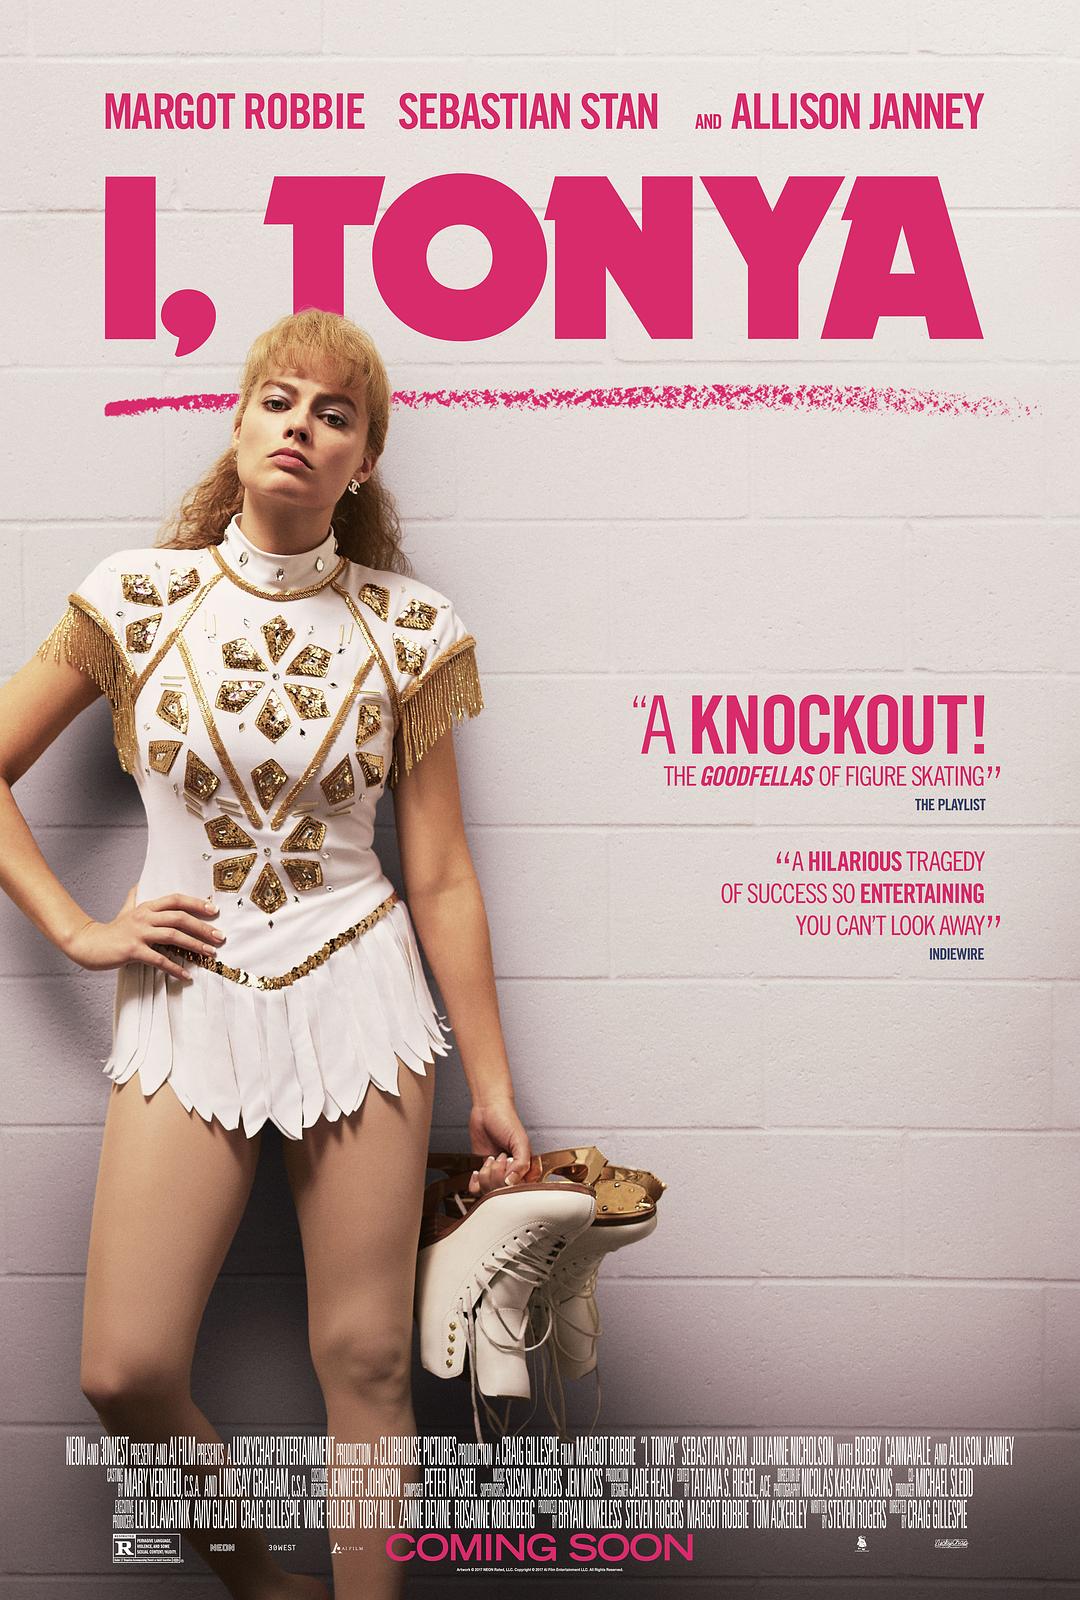 һŮ/֮Ů I.Tonya.2017.1080p.BluRay.x264.DTS-HD.MA.5.1-FGT 10.54GB-1.png